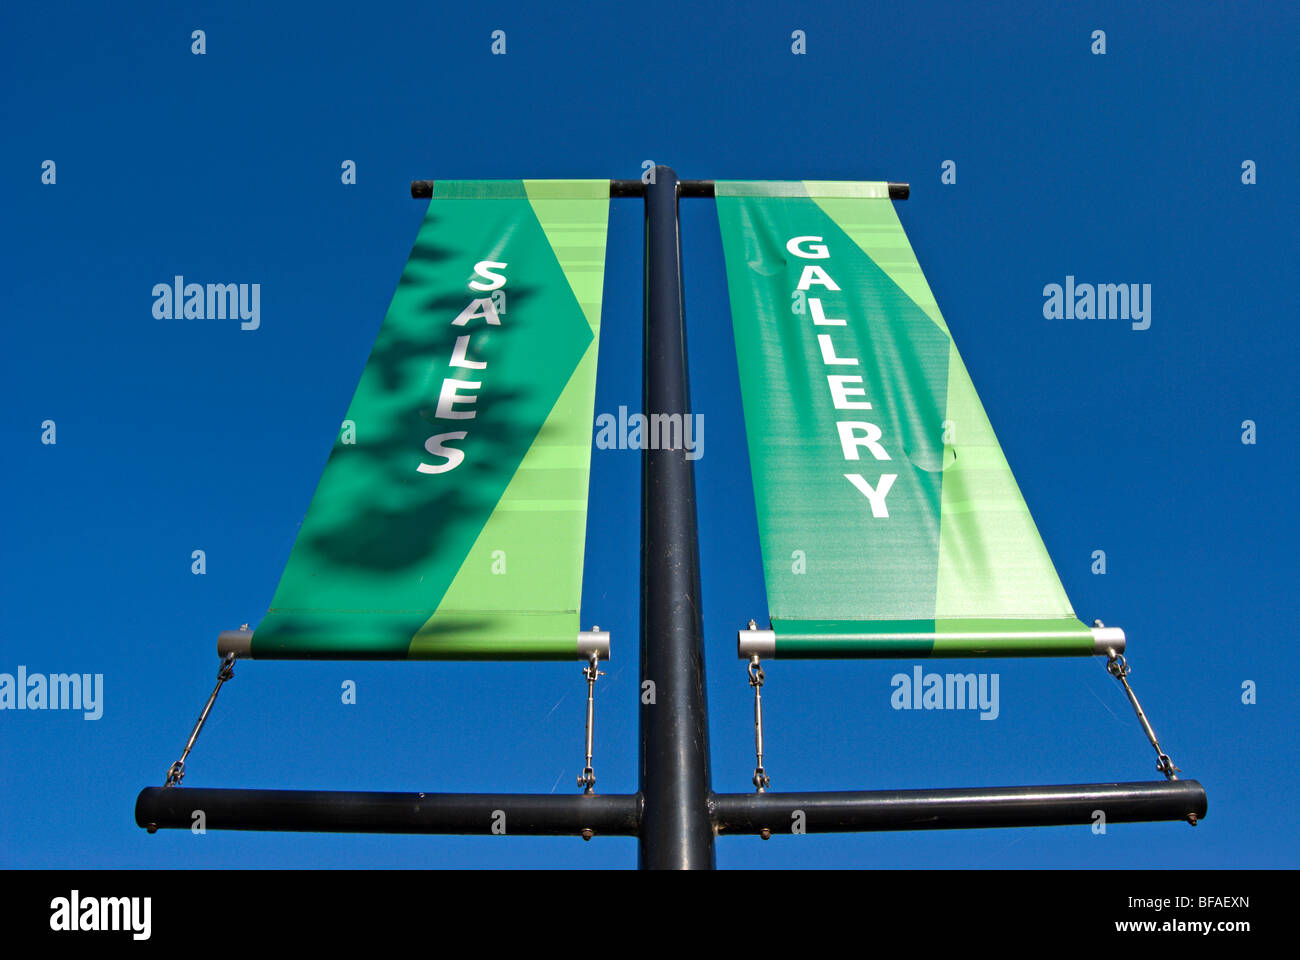 sales gallery banner for the apartments of the riverside quarter, wandsworth, london, england Stock Photo